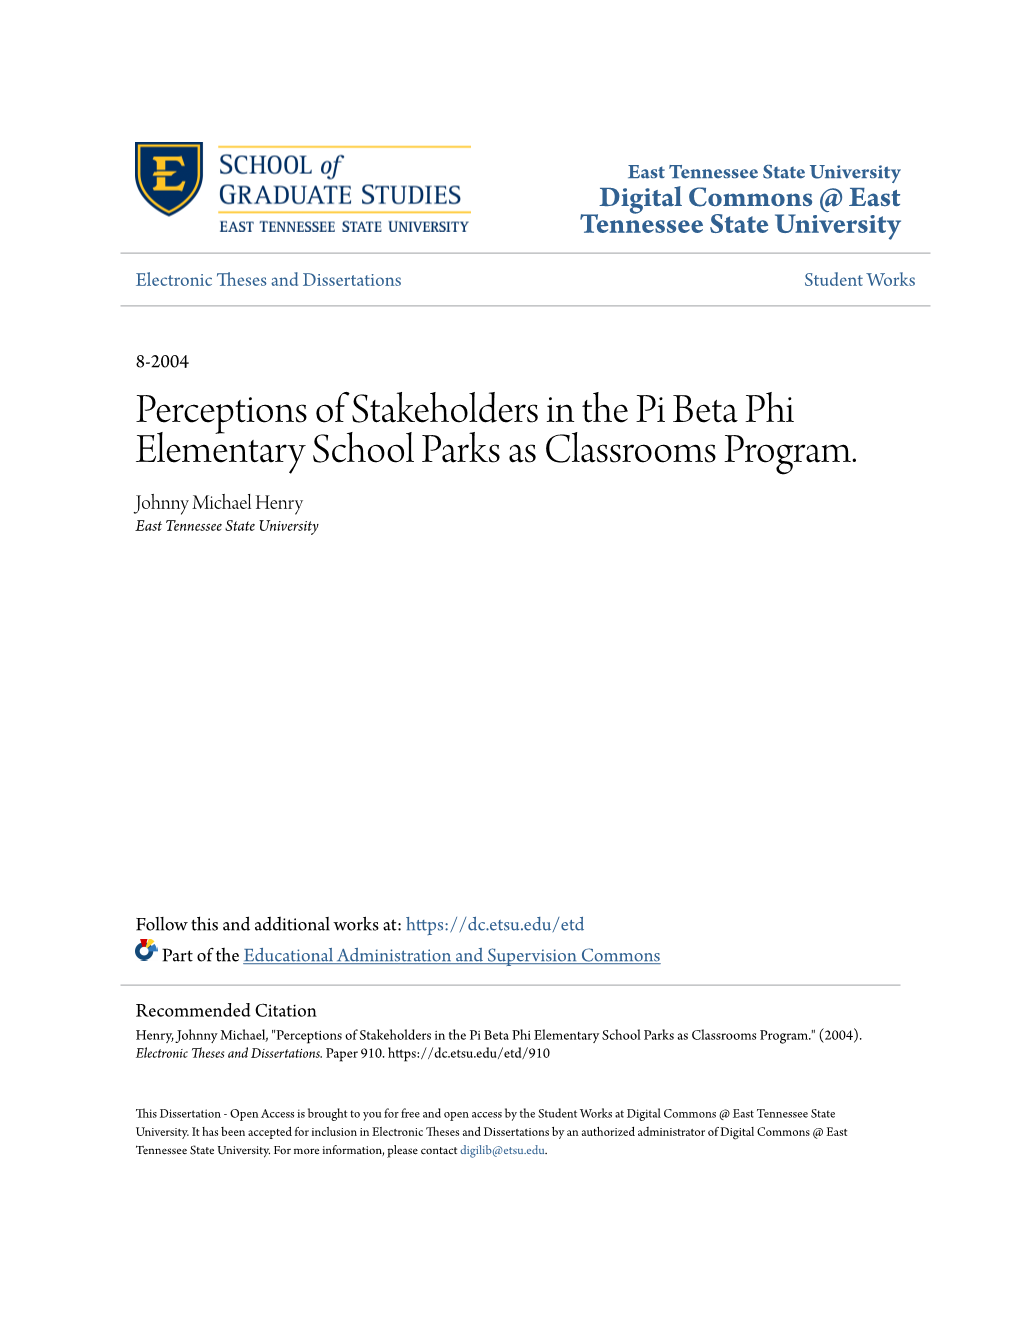 Perceptions of Stakeholders in the Pi Beta Phi Elementary School Parks As Classrooms Program